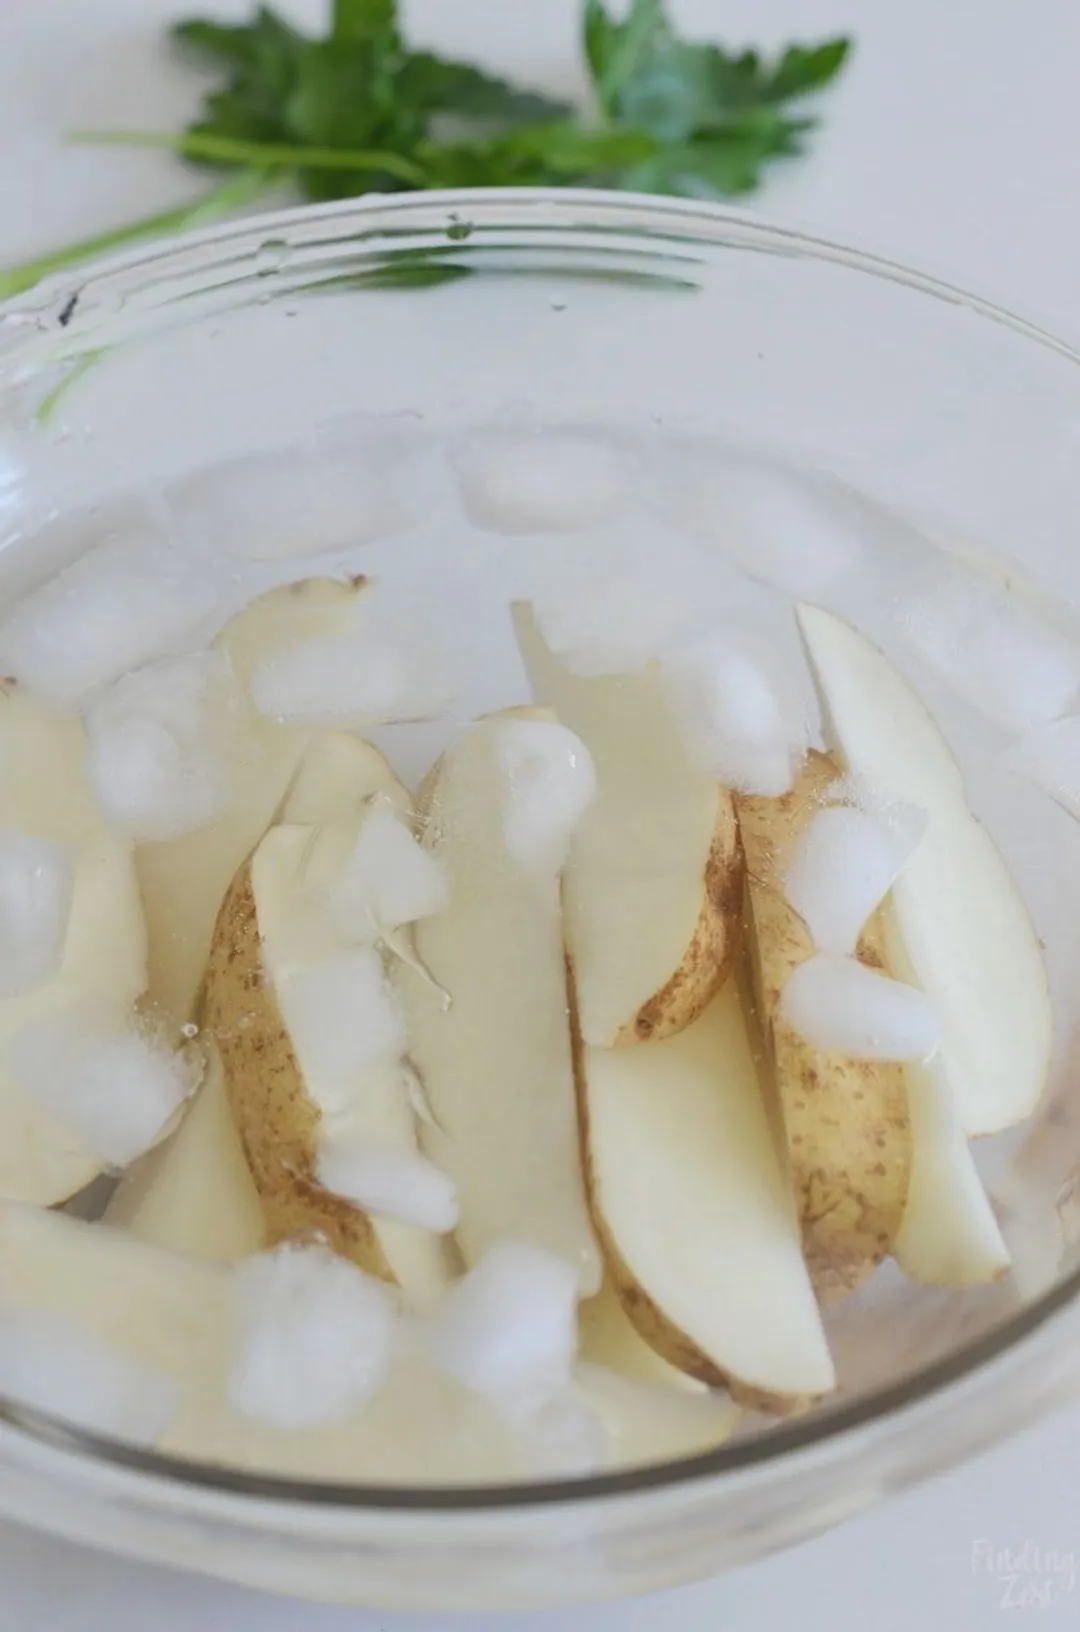 Dip into the ice bath for rapid cooling to freeze potatoes